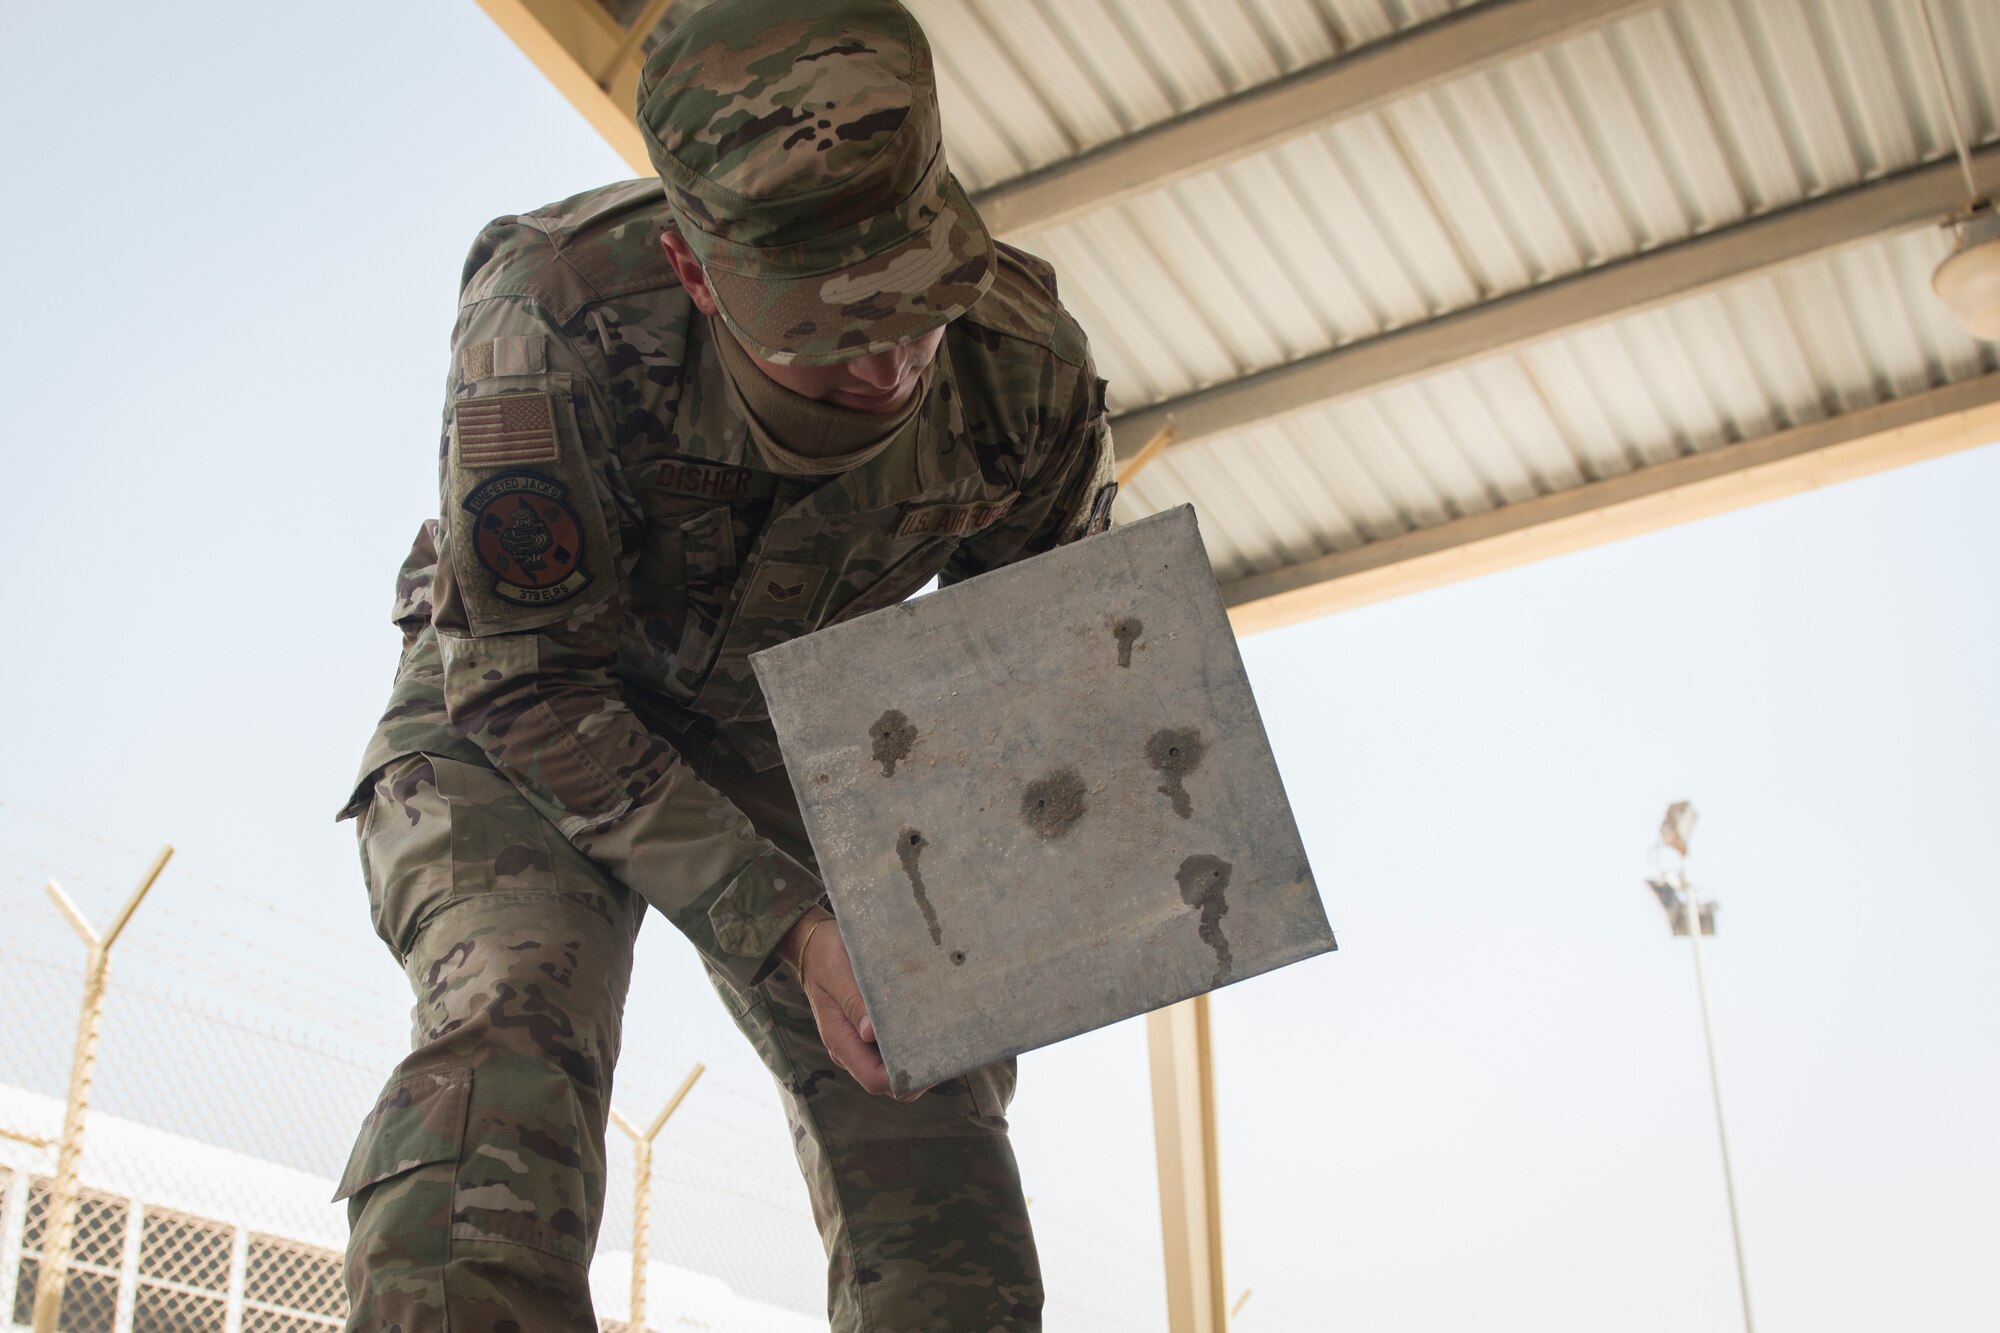 U.S. Air Force Senior Airman Ryan Disher, a vehicle operator assigned to the 379th Expeditionary Logistics Readiness Squadron, removes a drainage pan from a vehicle wash rack at Al Udeid Air Base, Qatar, June 13, 2020.